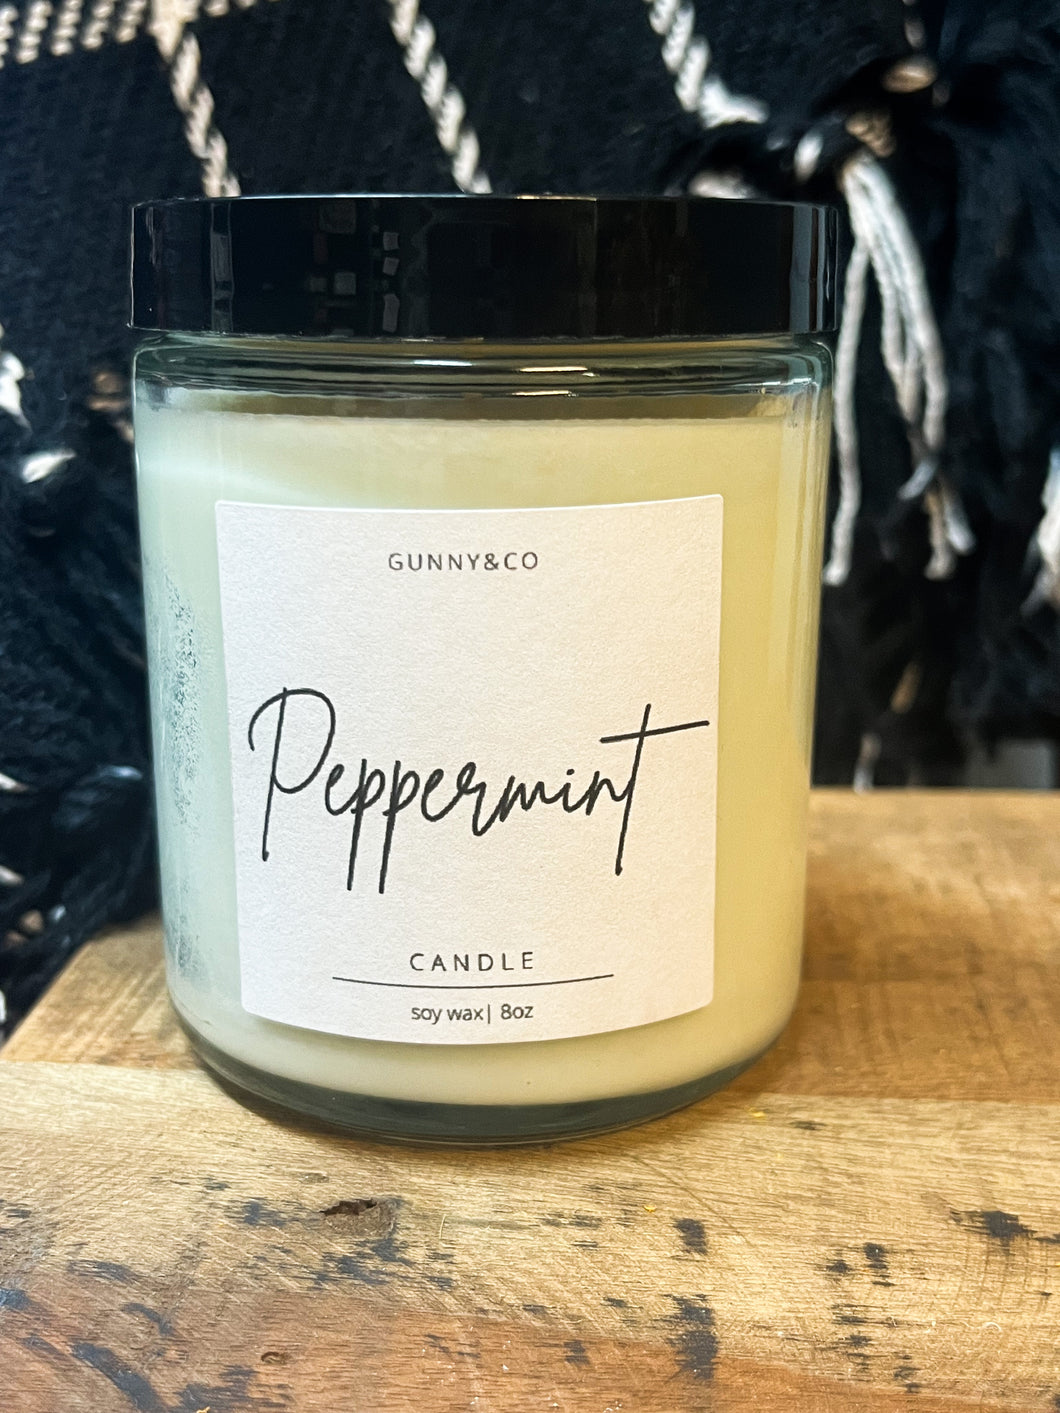 Peppermint Candle